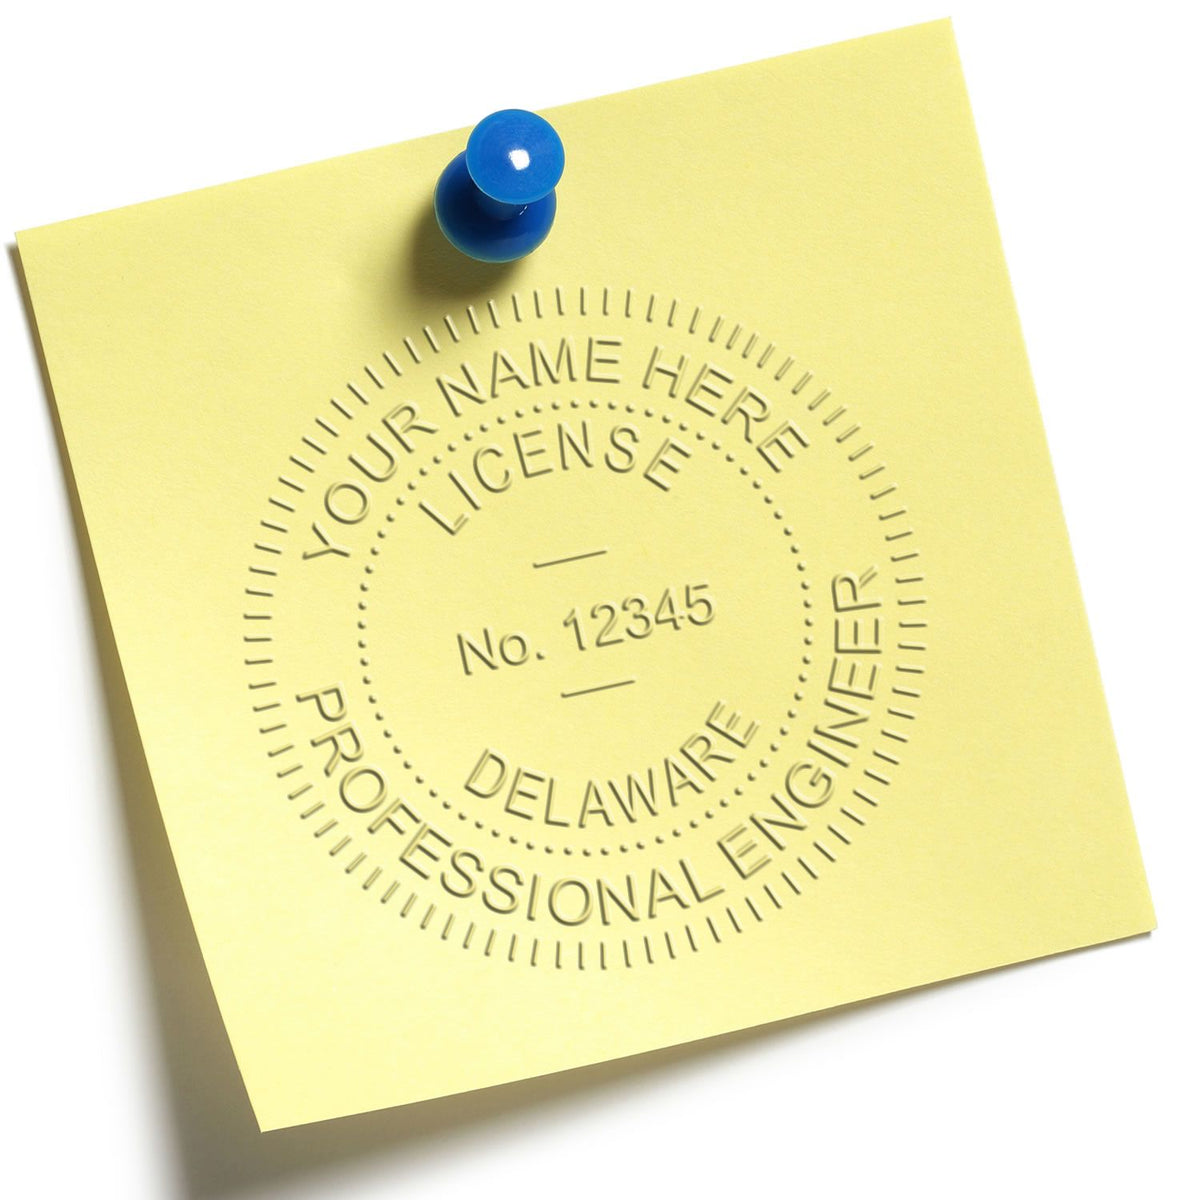 This paper is stamped with a sample imprint of the Soft Delaware Professional Engineer Seal, signifying its quality and reliability.